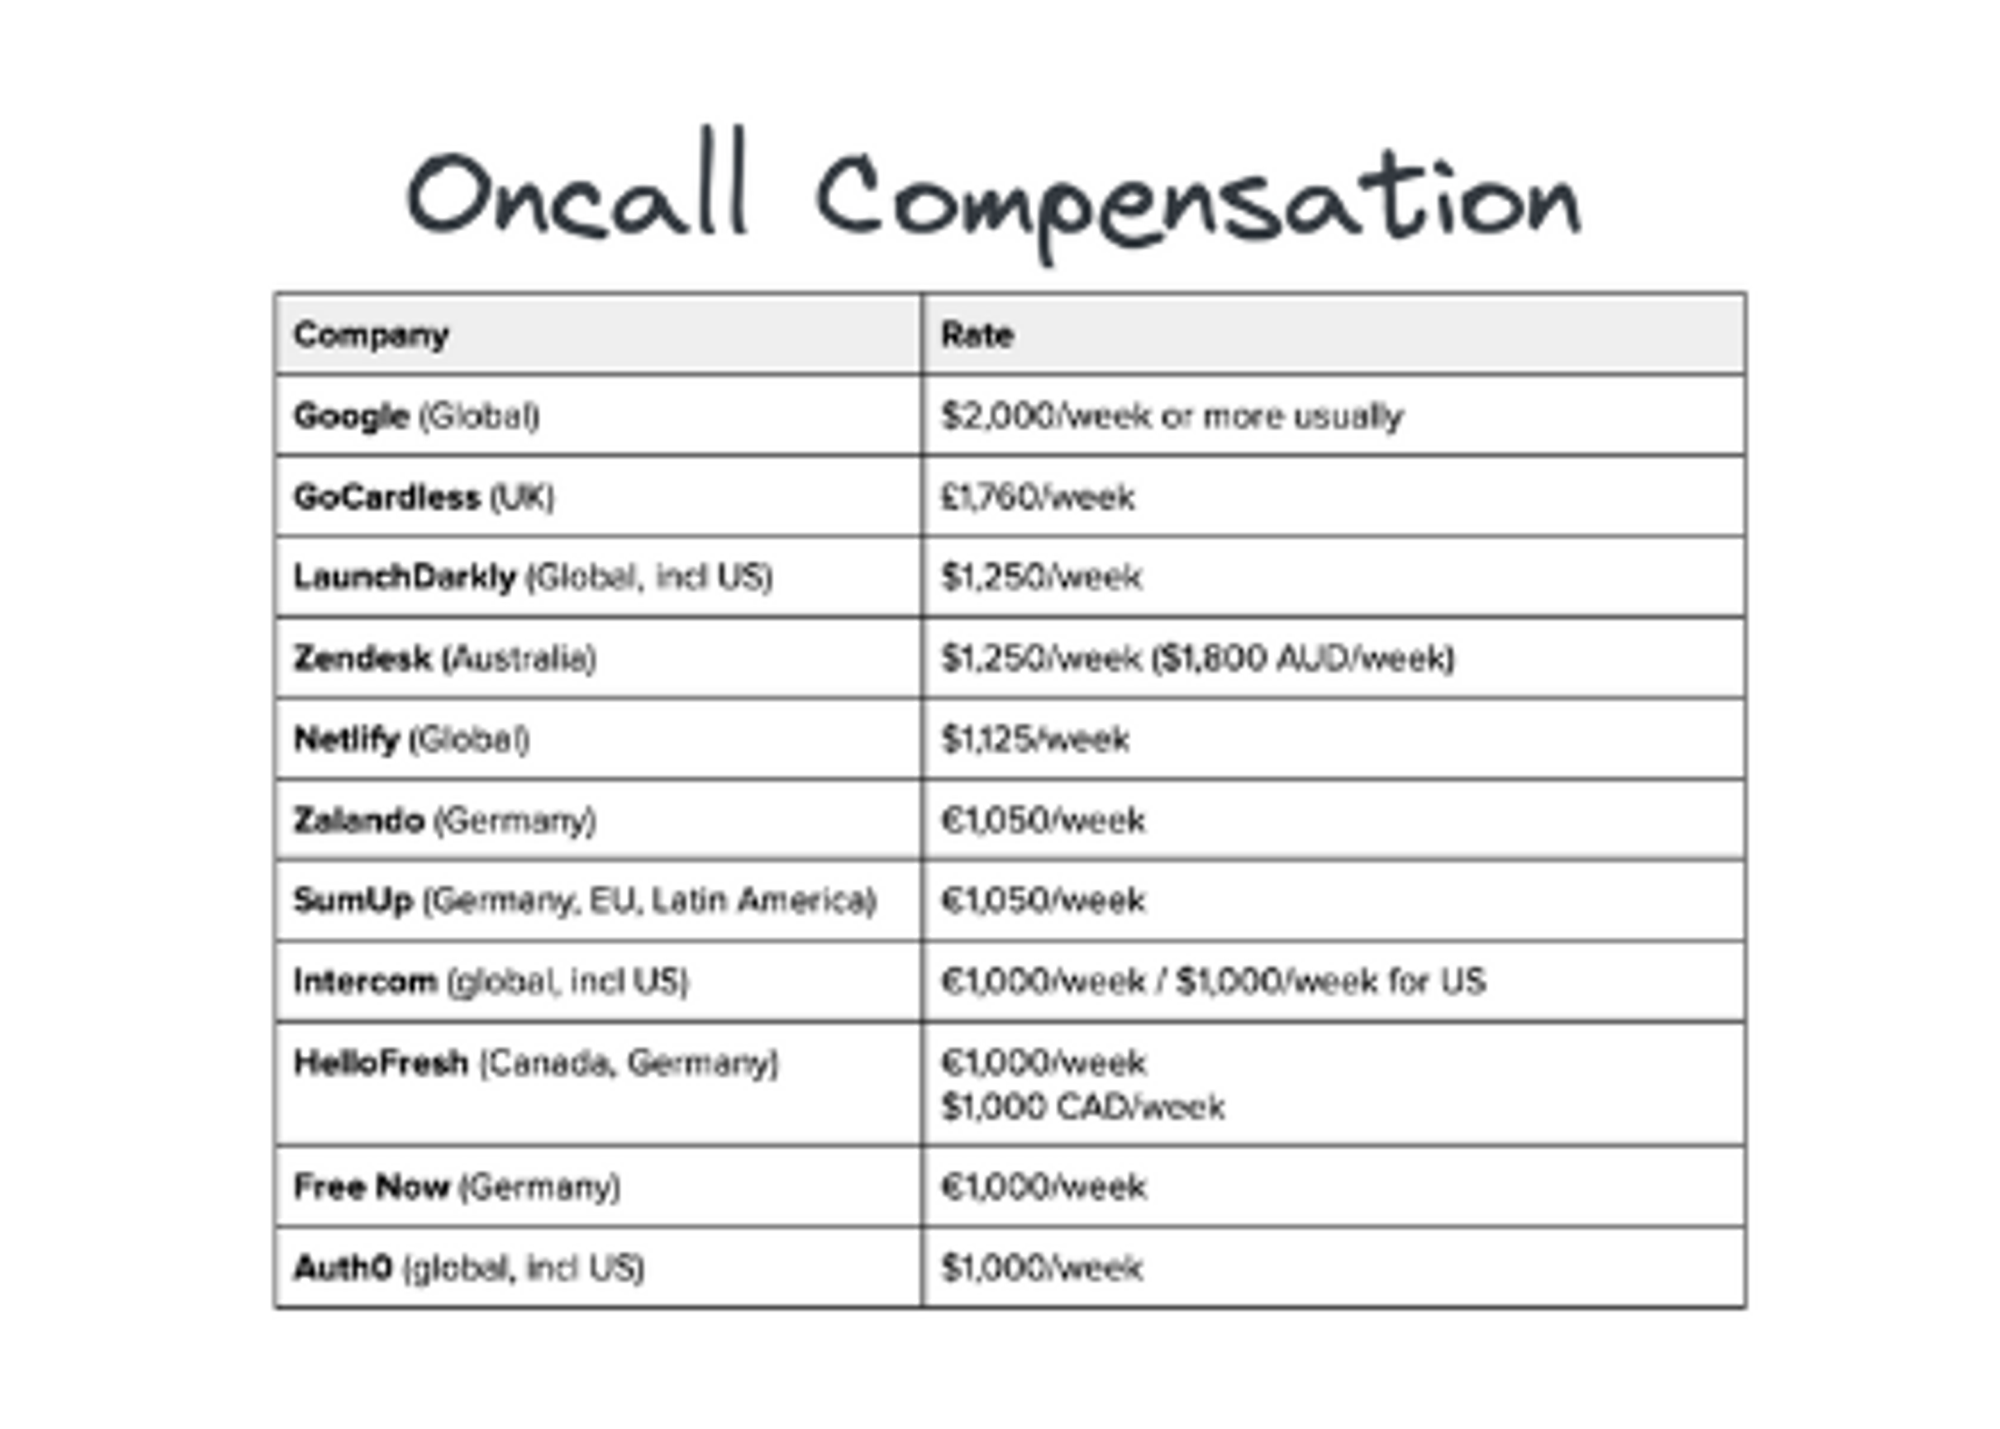 Oncall Compensation for Software Engineers